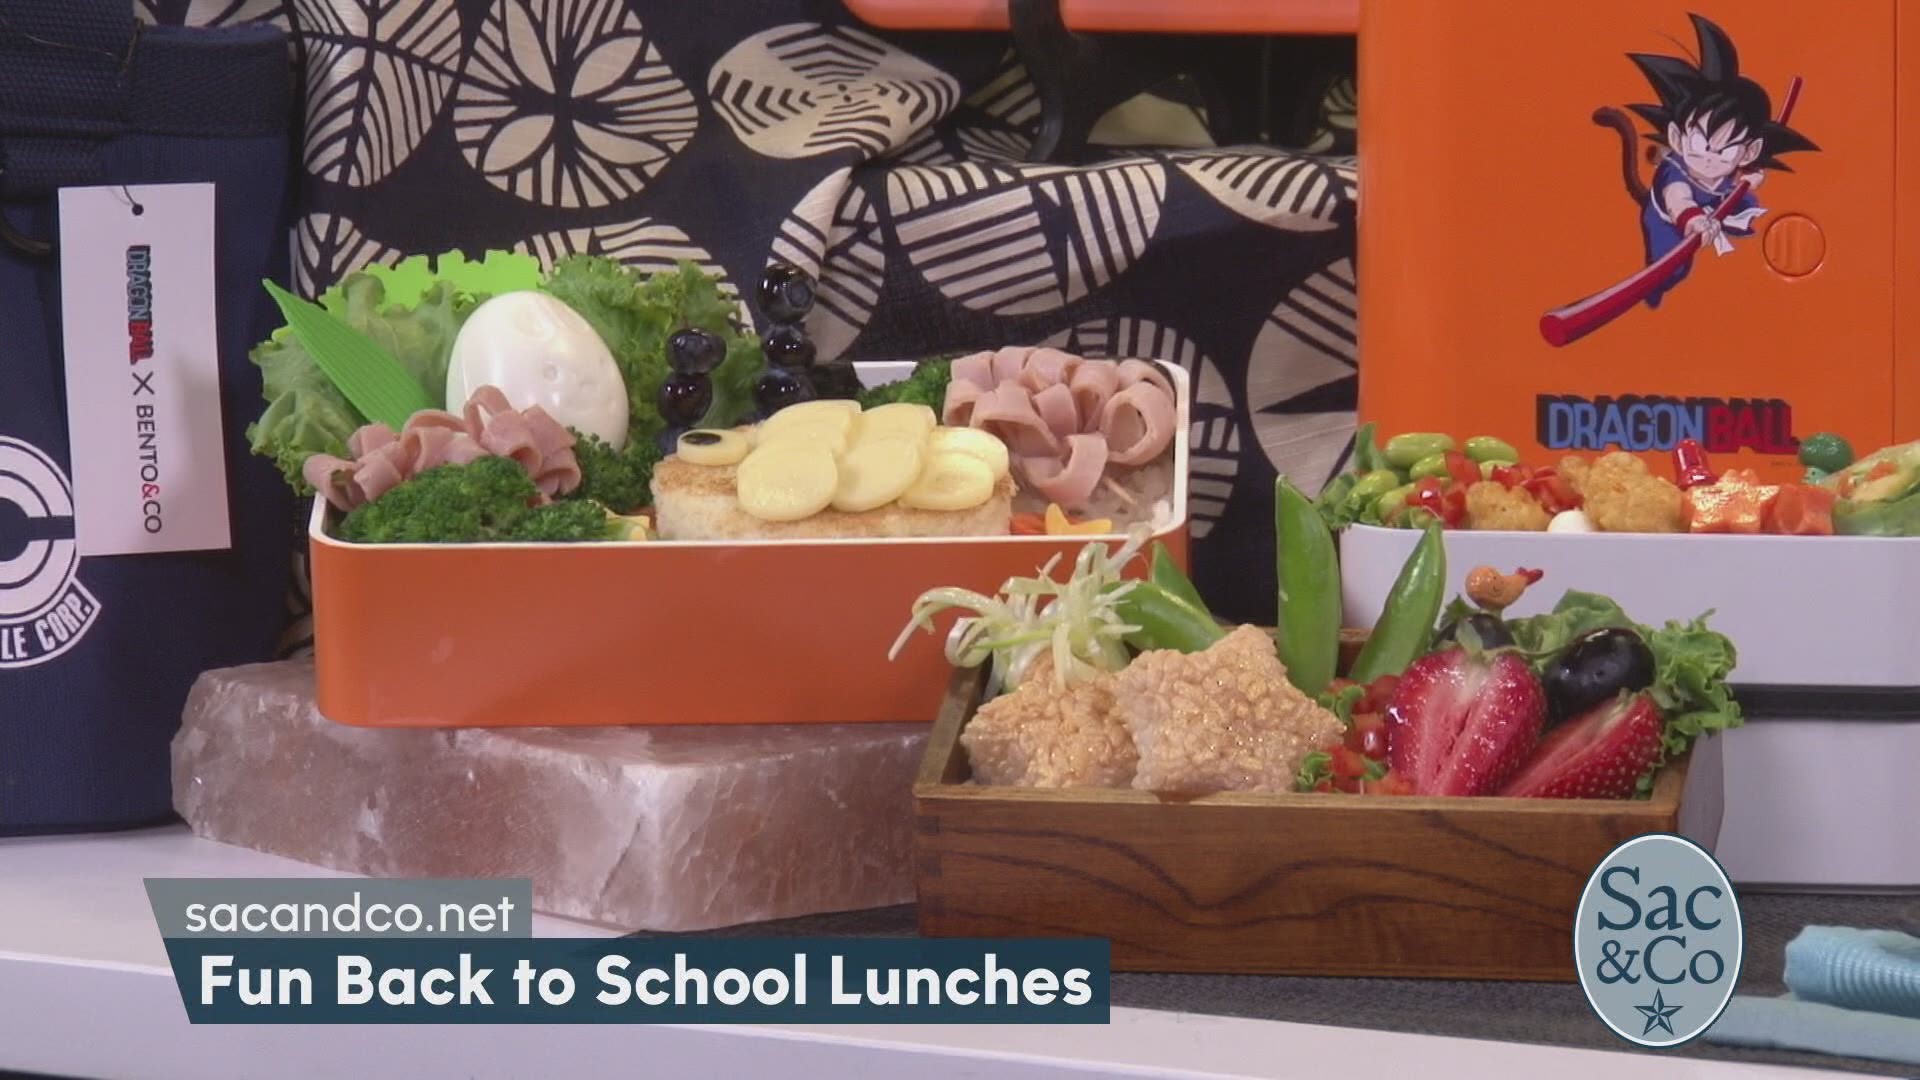 Check out Chef Gigi’s back to school alternatives for school lunches and how to get your kiddos excited to eat healthier!